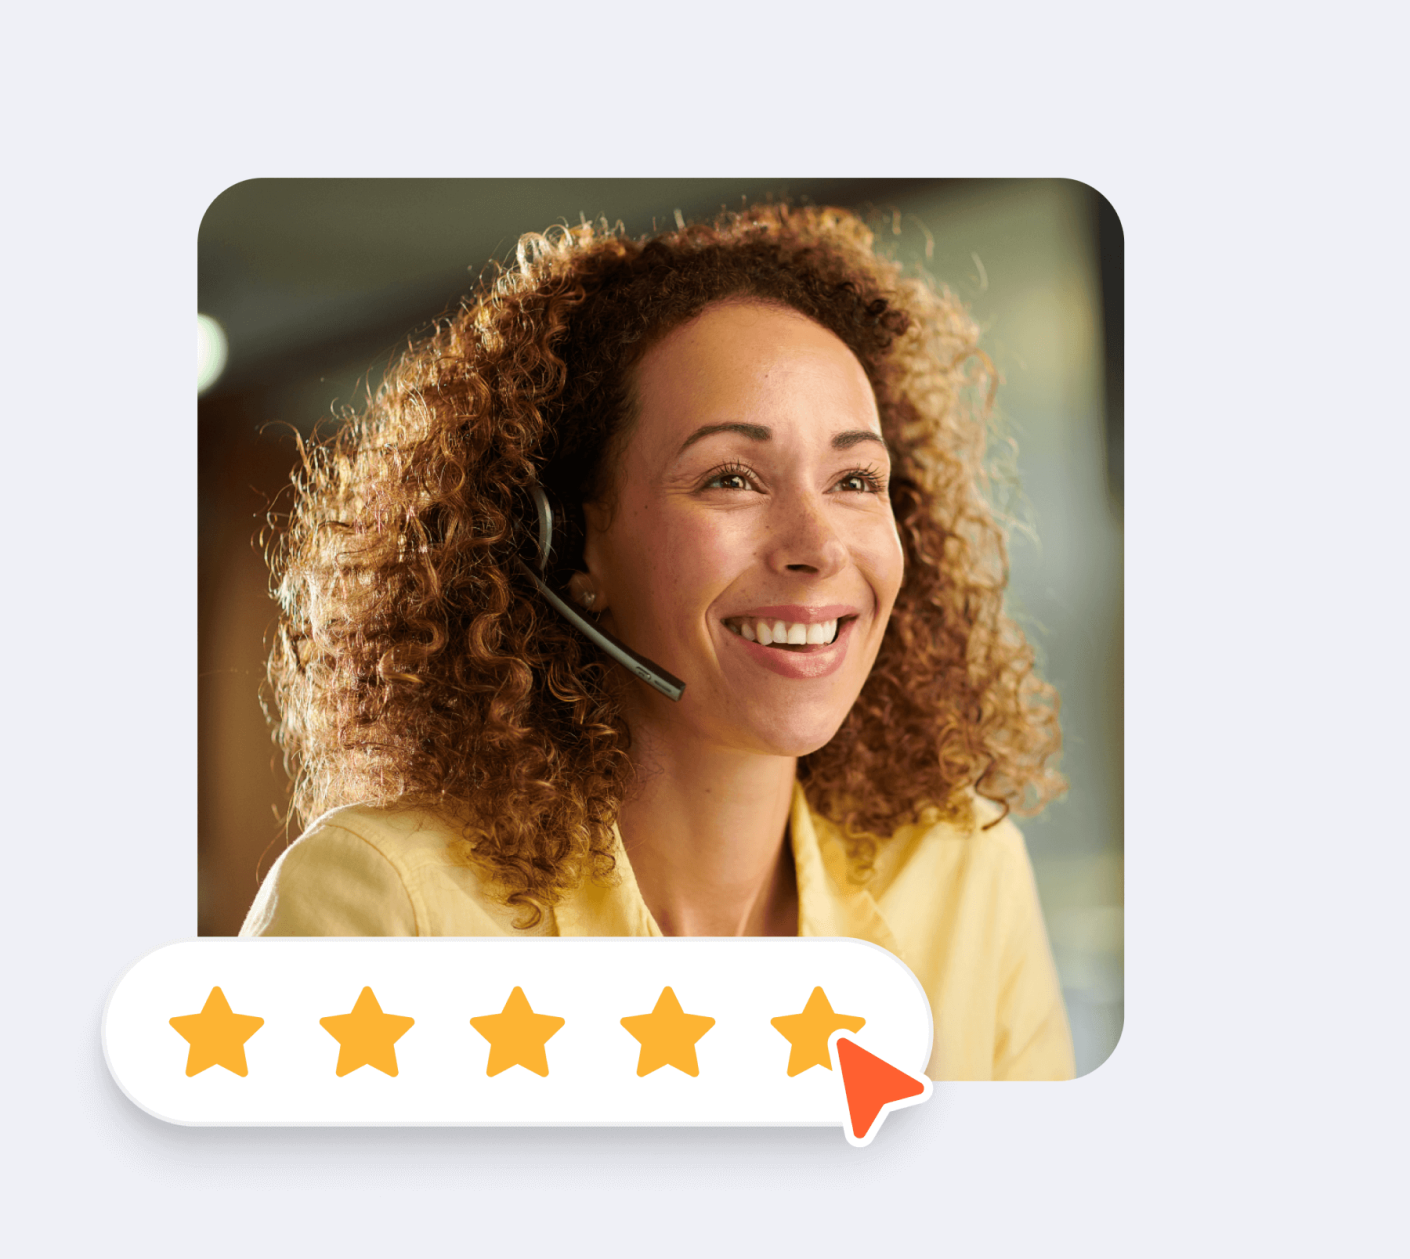 Click-to-call to enhance customer experience